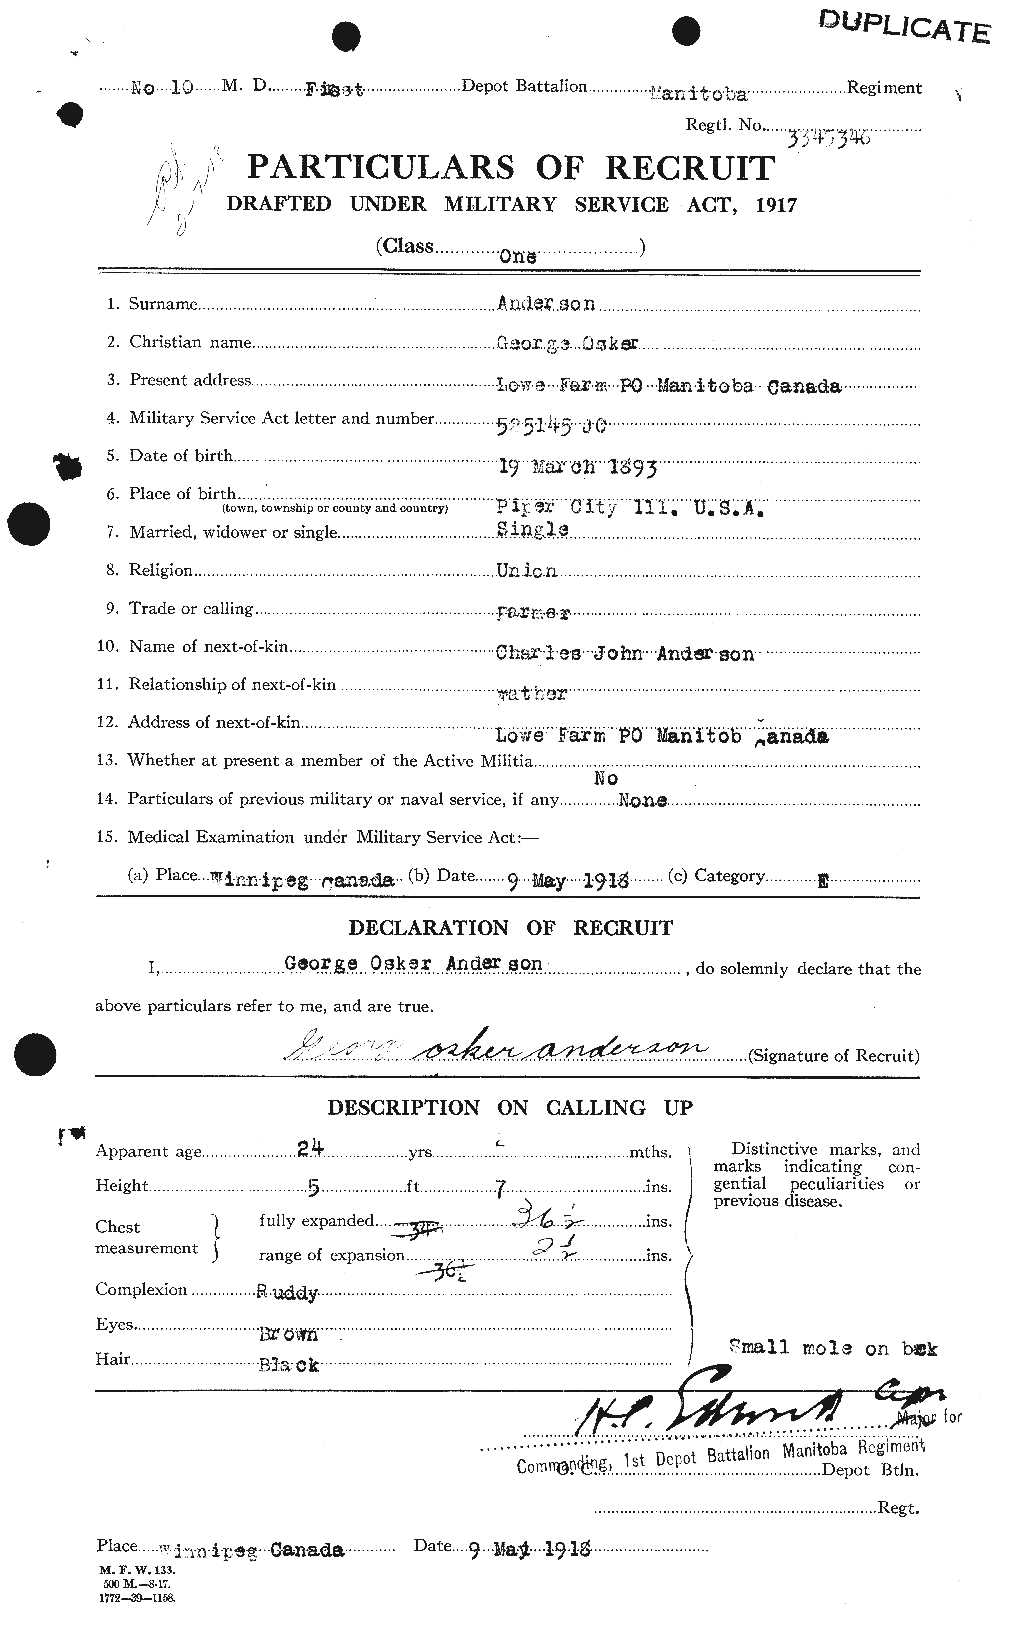 Personnel Records of the First World War - CEF 209705b